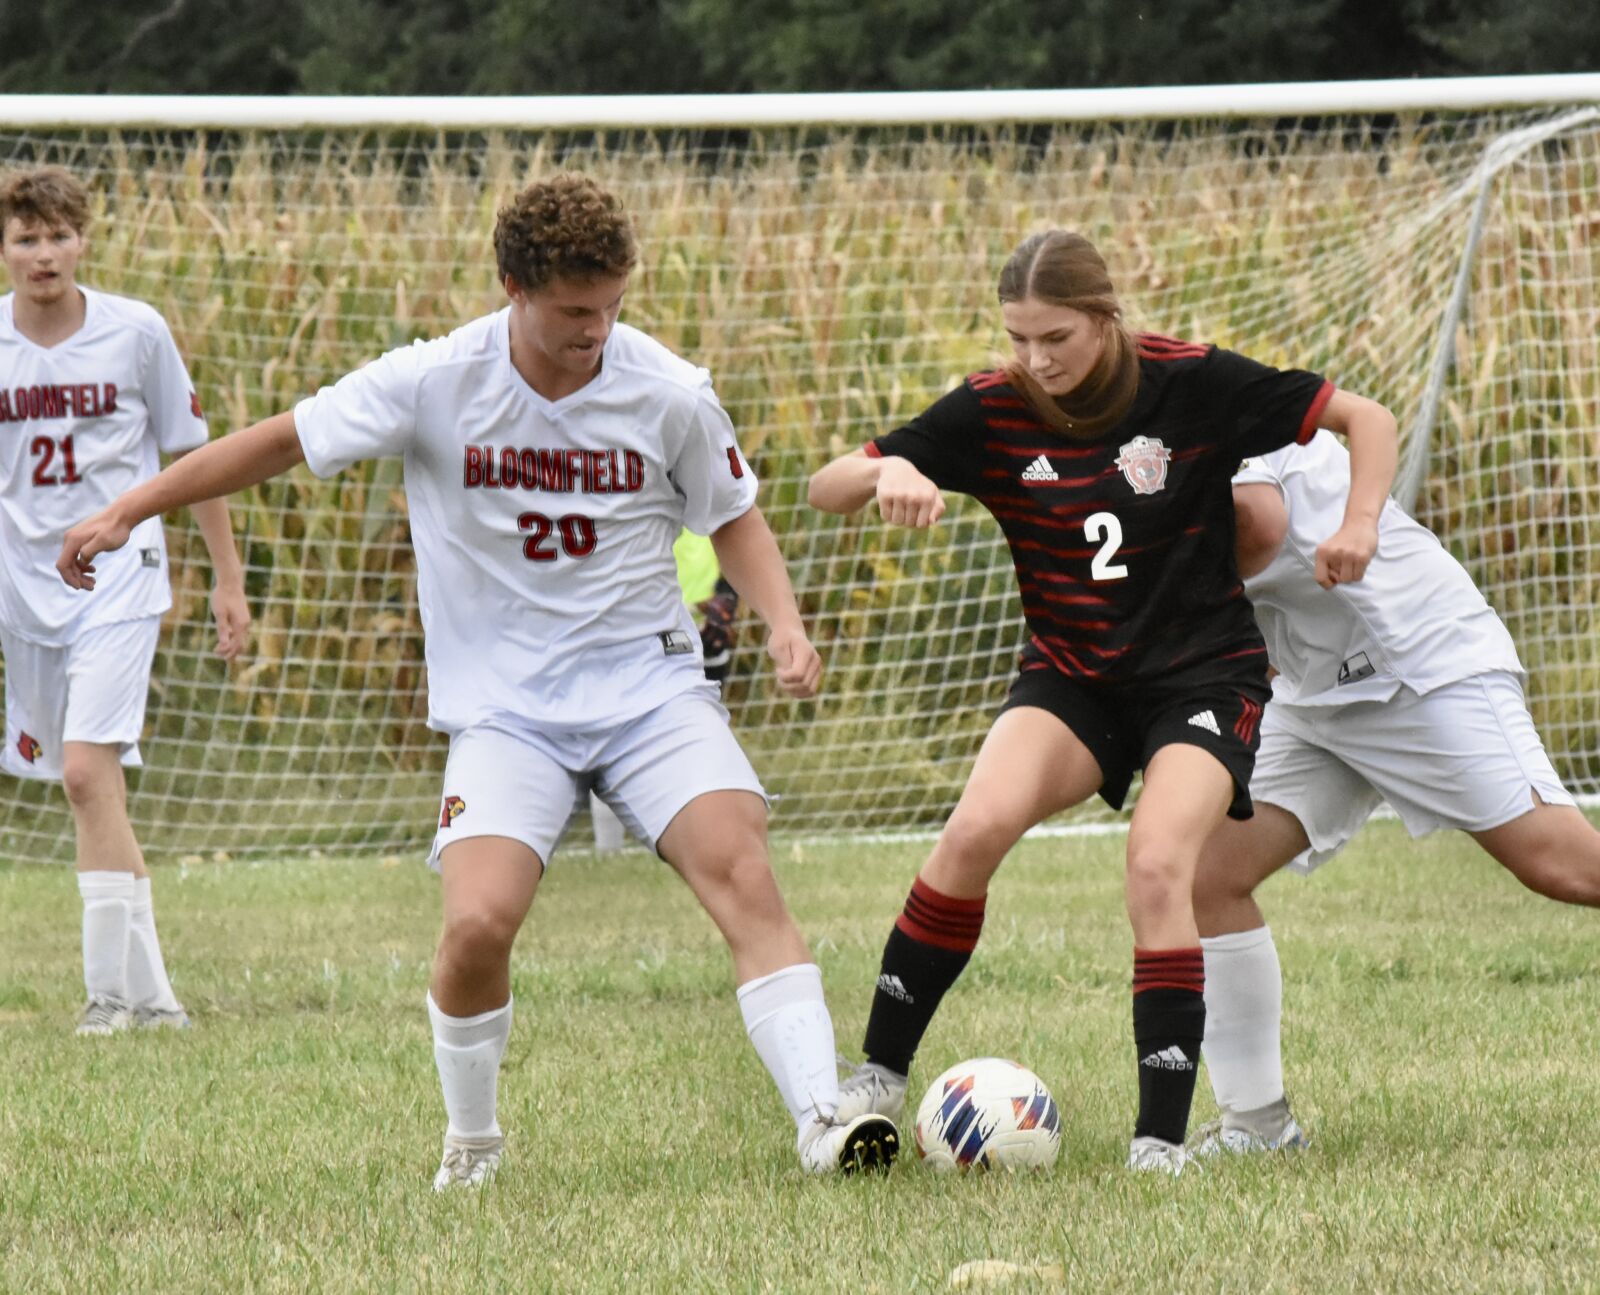 Barr-Reeve Vikings Triumph Over Bloomfield in Class A Soccer Match